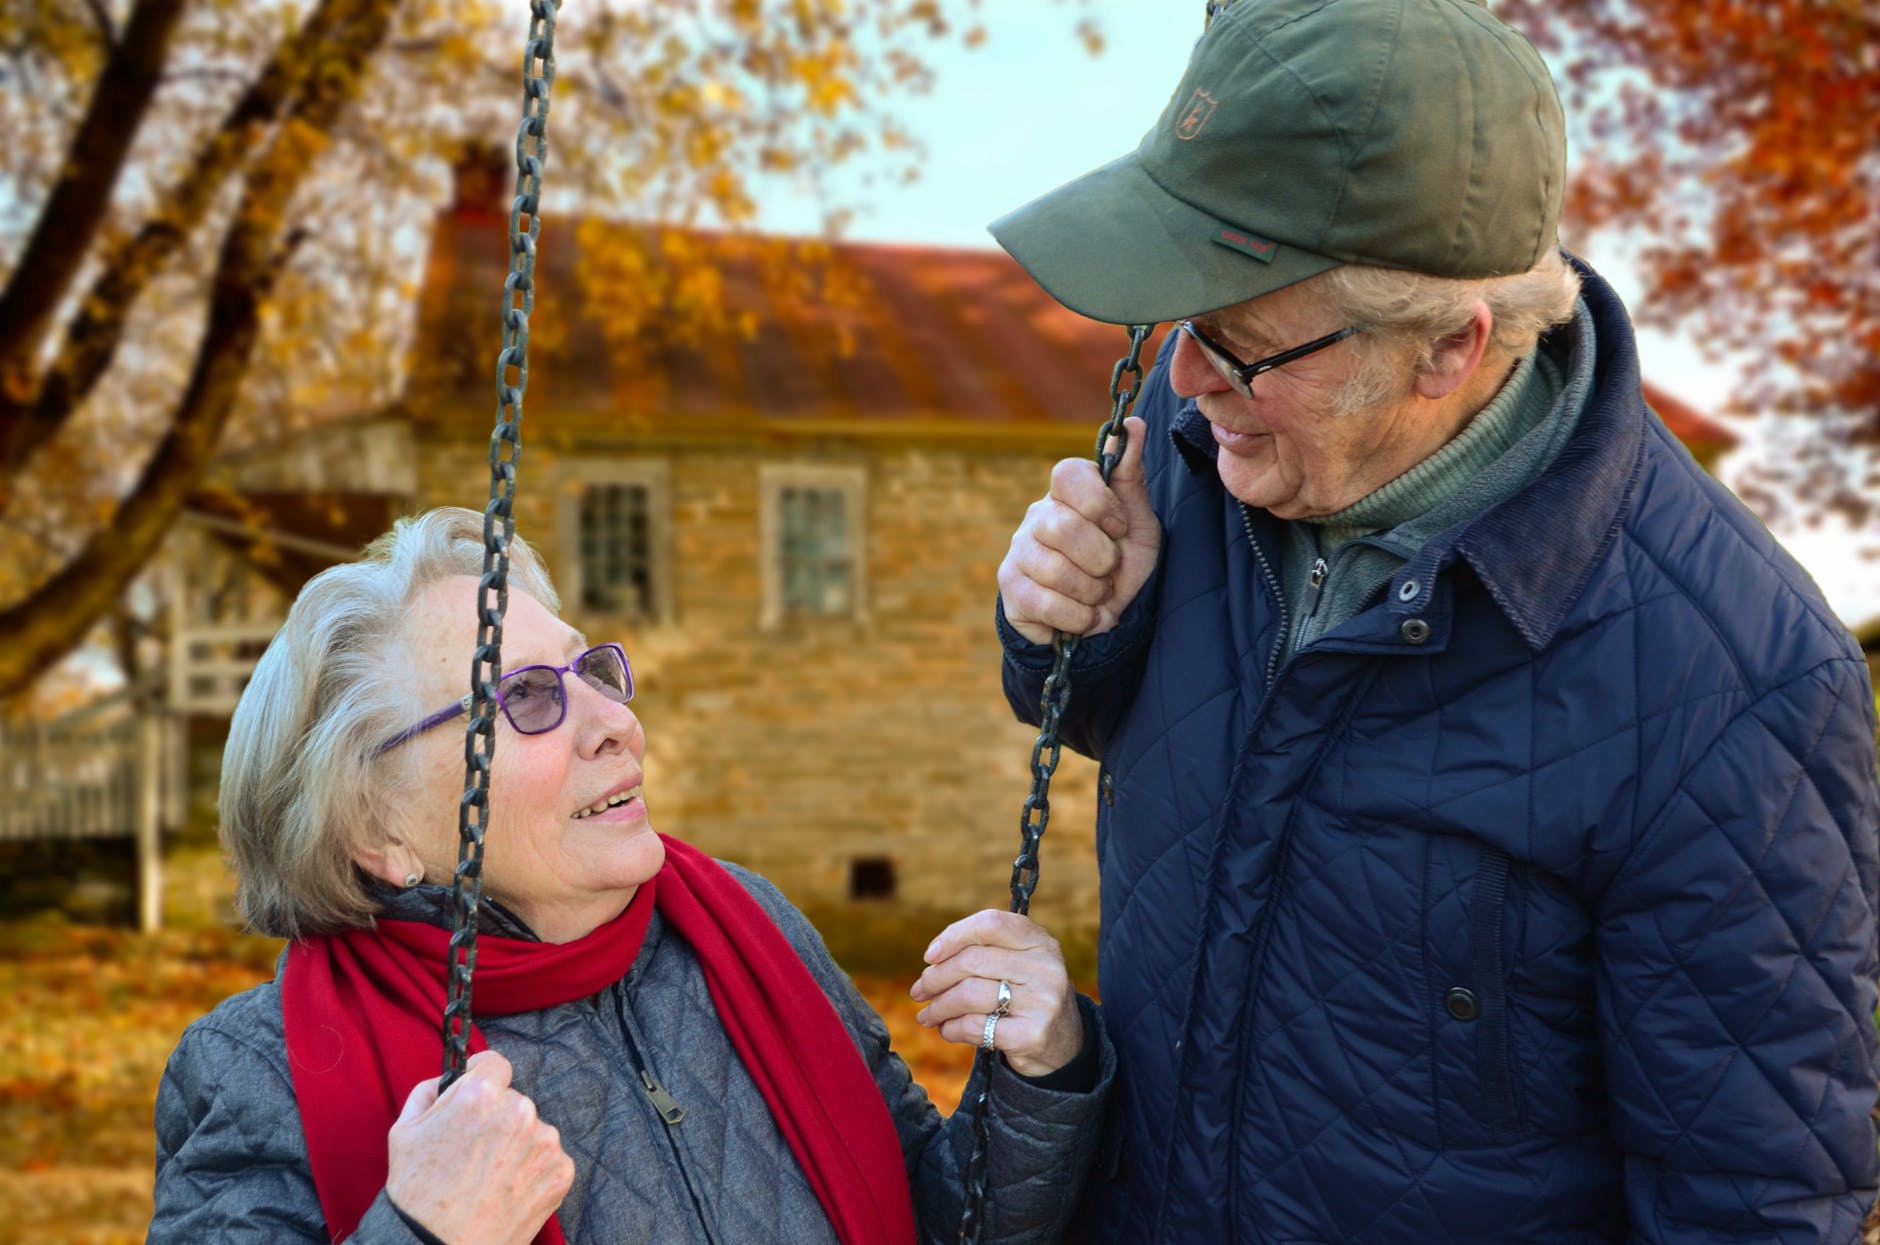 old-people-couple-together-connected.jpg